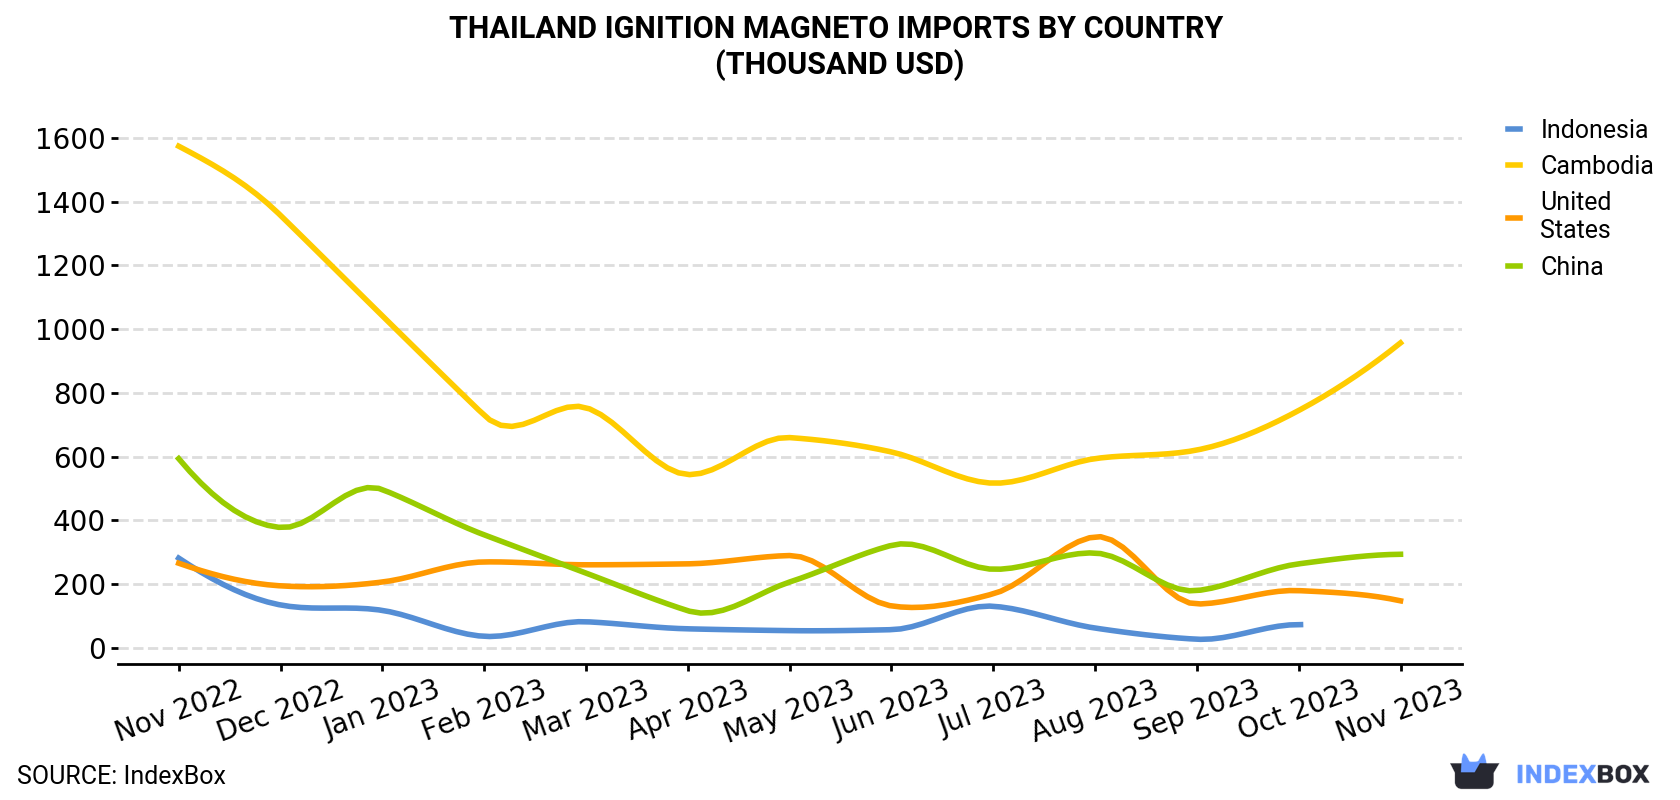 Thailand Ignition Magneto Imports By Country (Thousand USD)